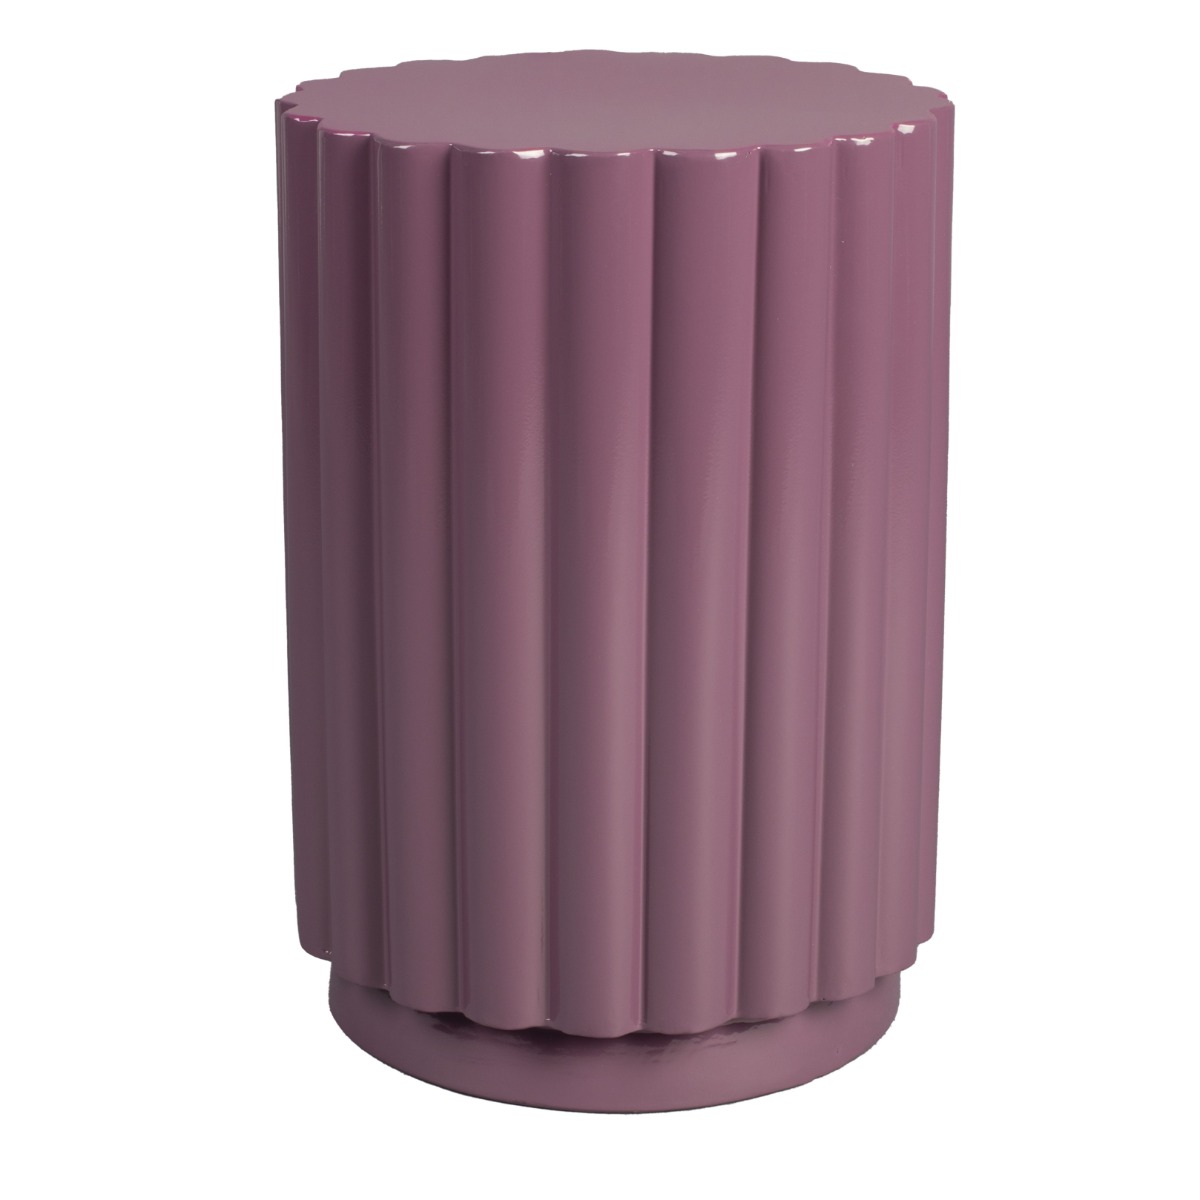 Camilla Stool / Side Table in Plum